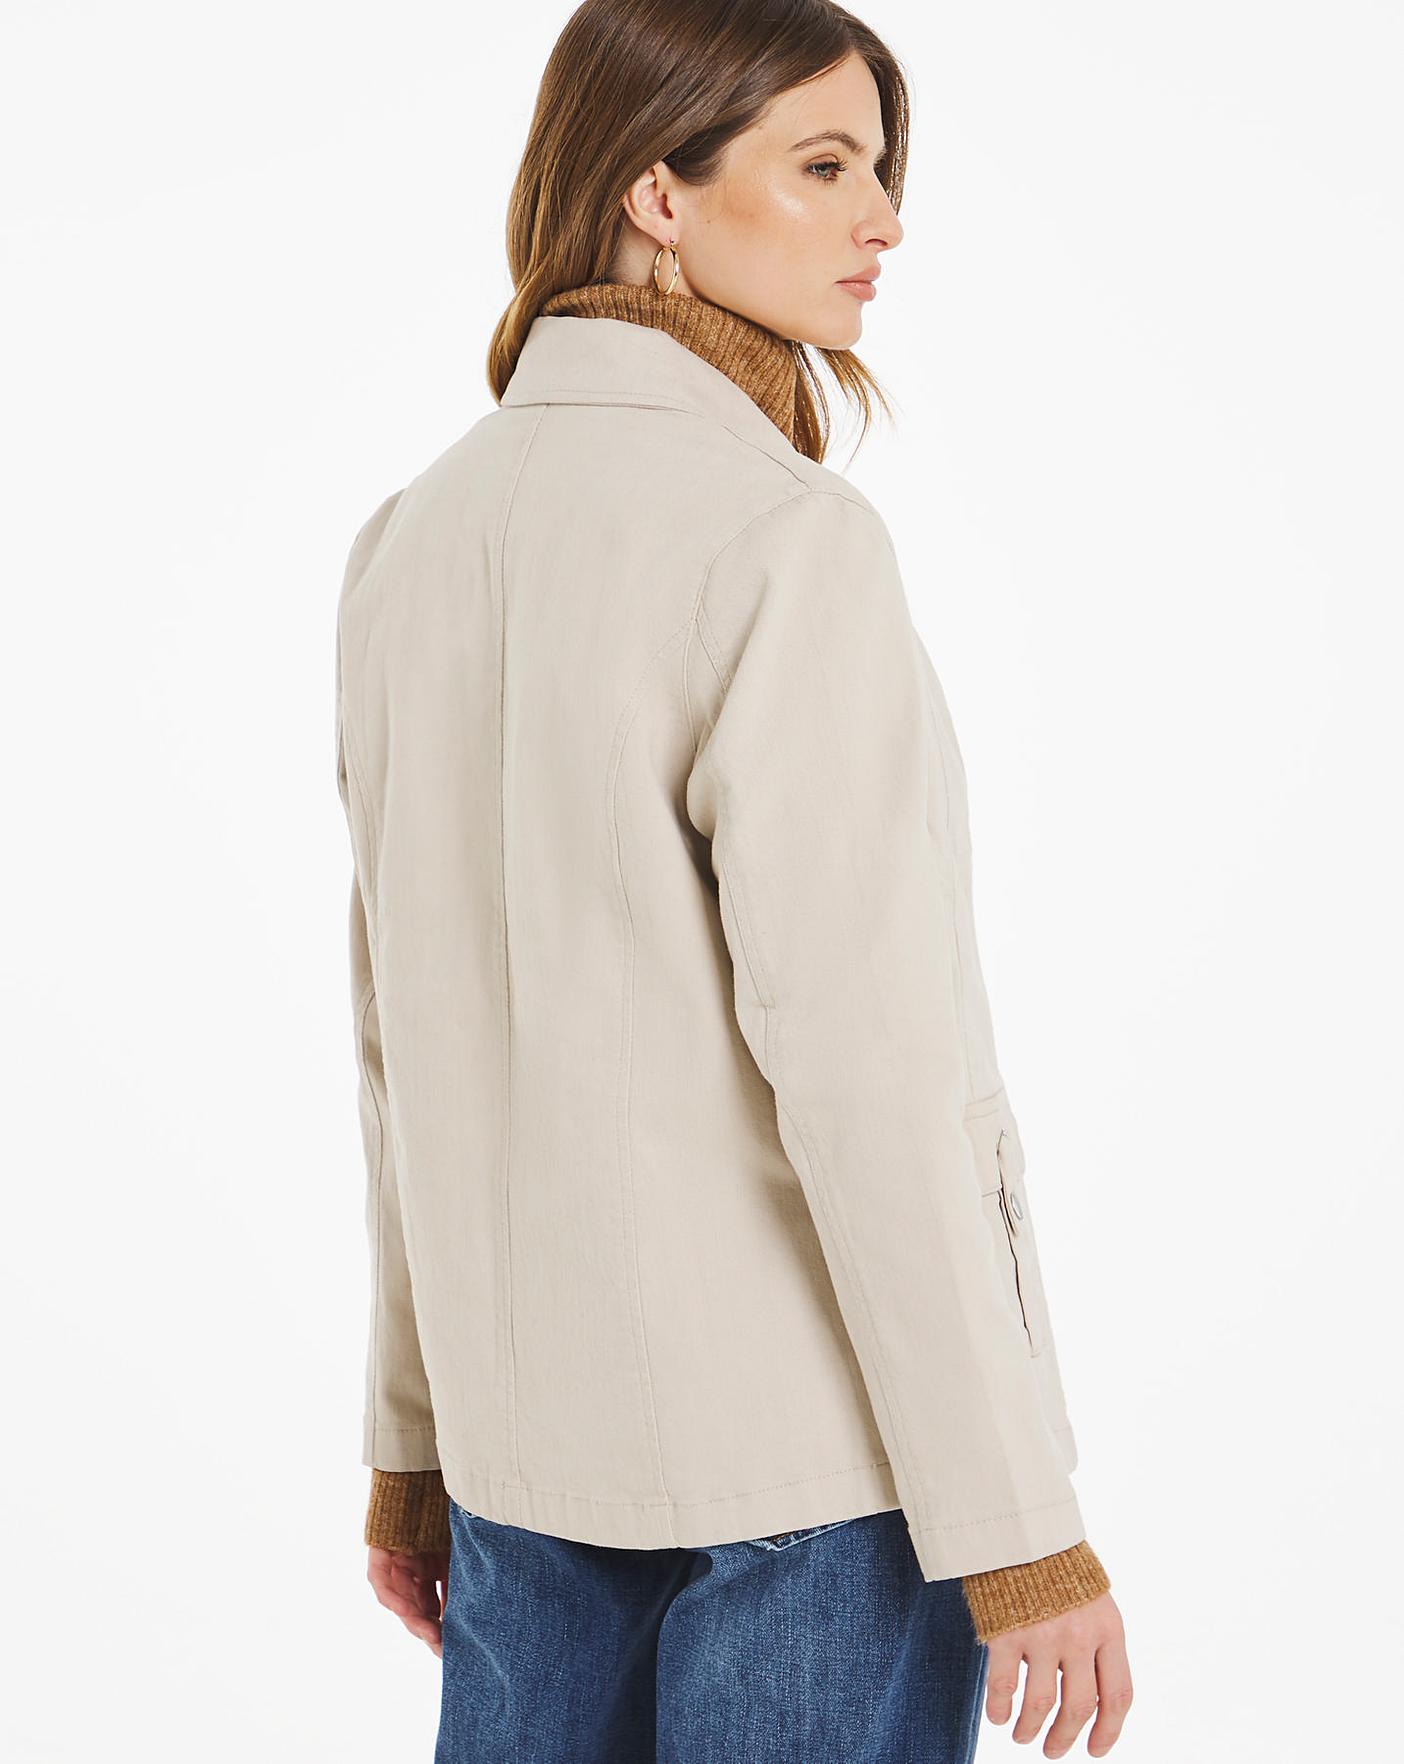 Julipa Twill Jacket with Pocket Detail | Oxendales